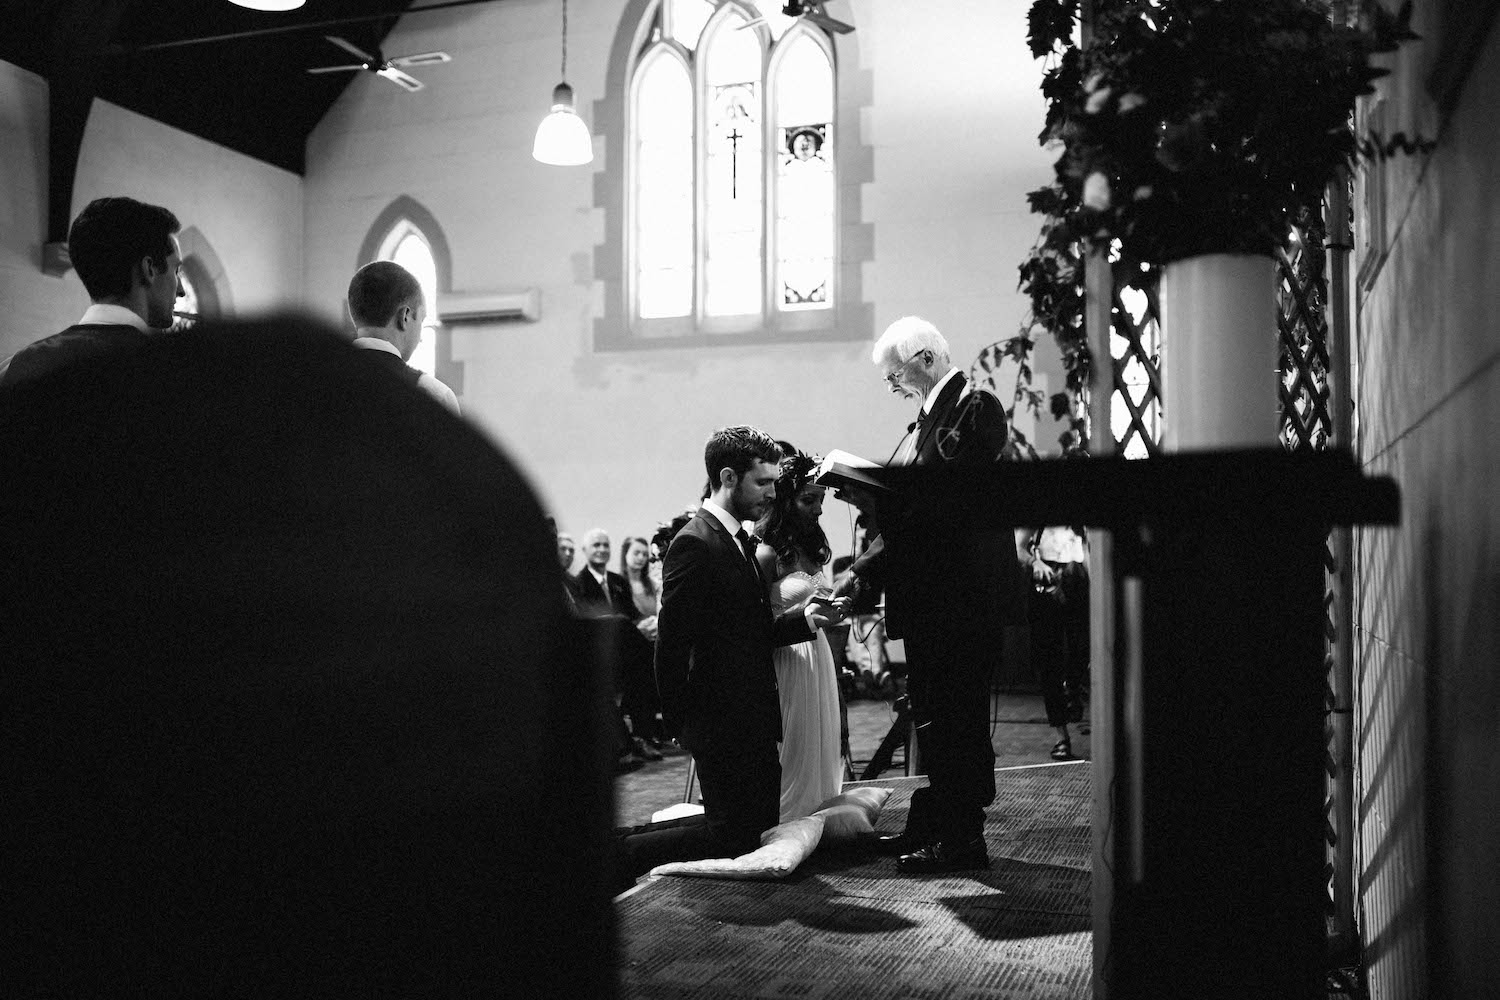 A bride & groom receiving an anglican blessing at their Subiaco wedding.